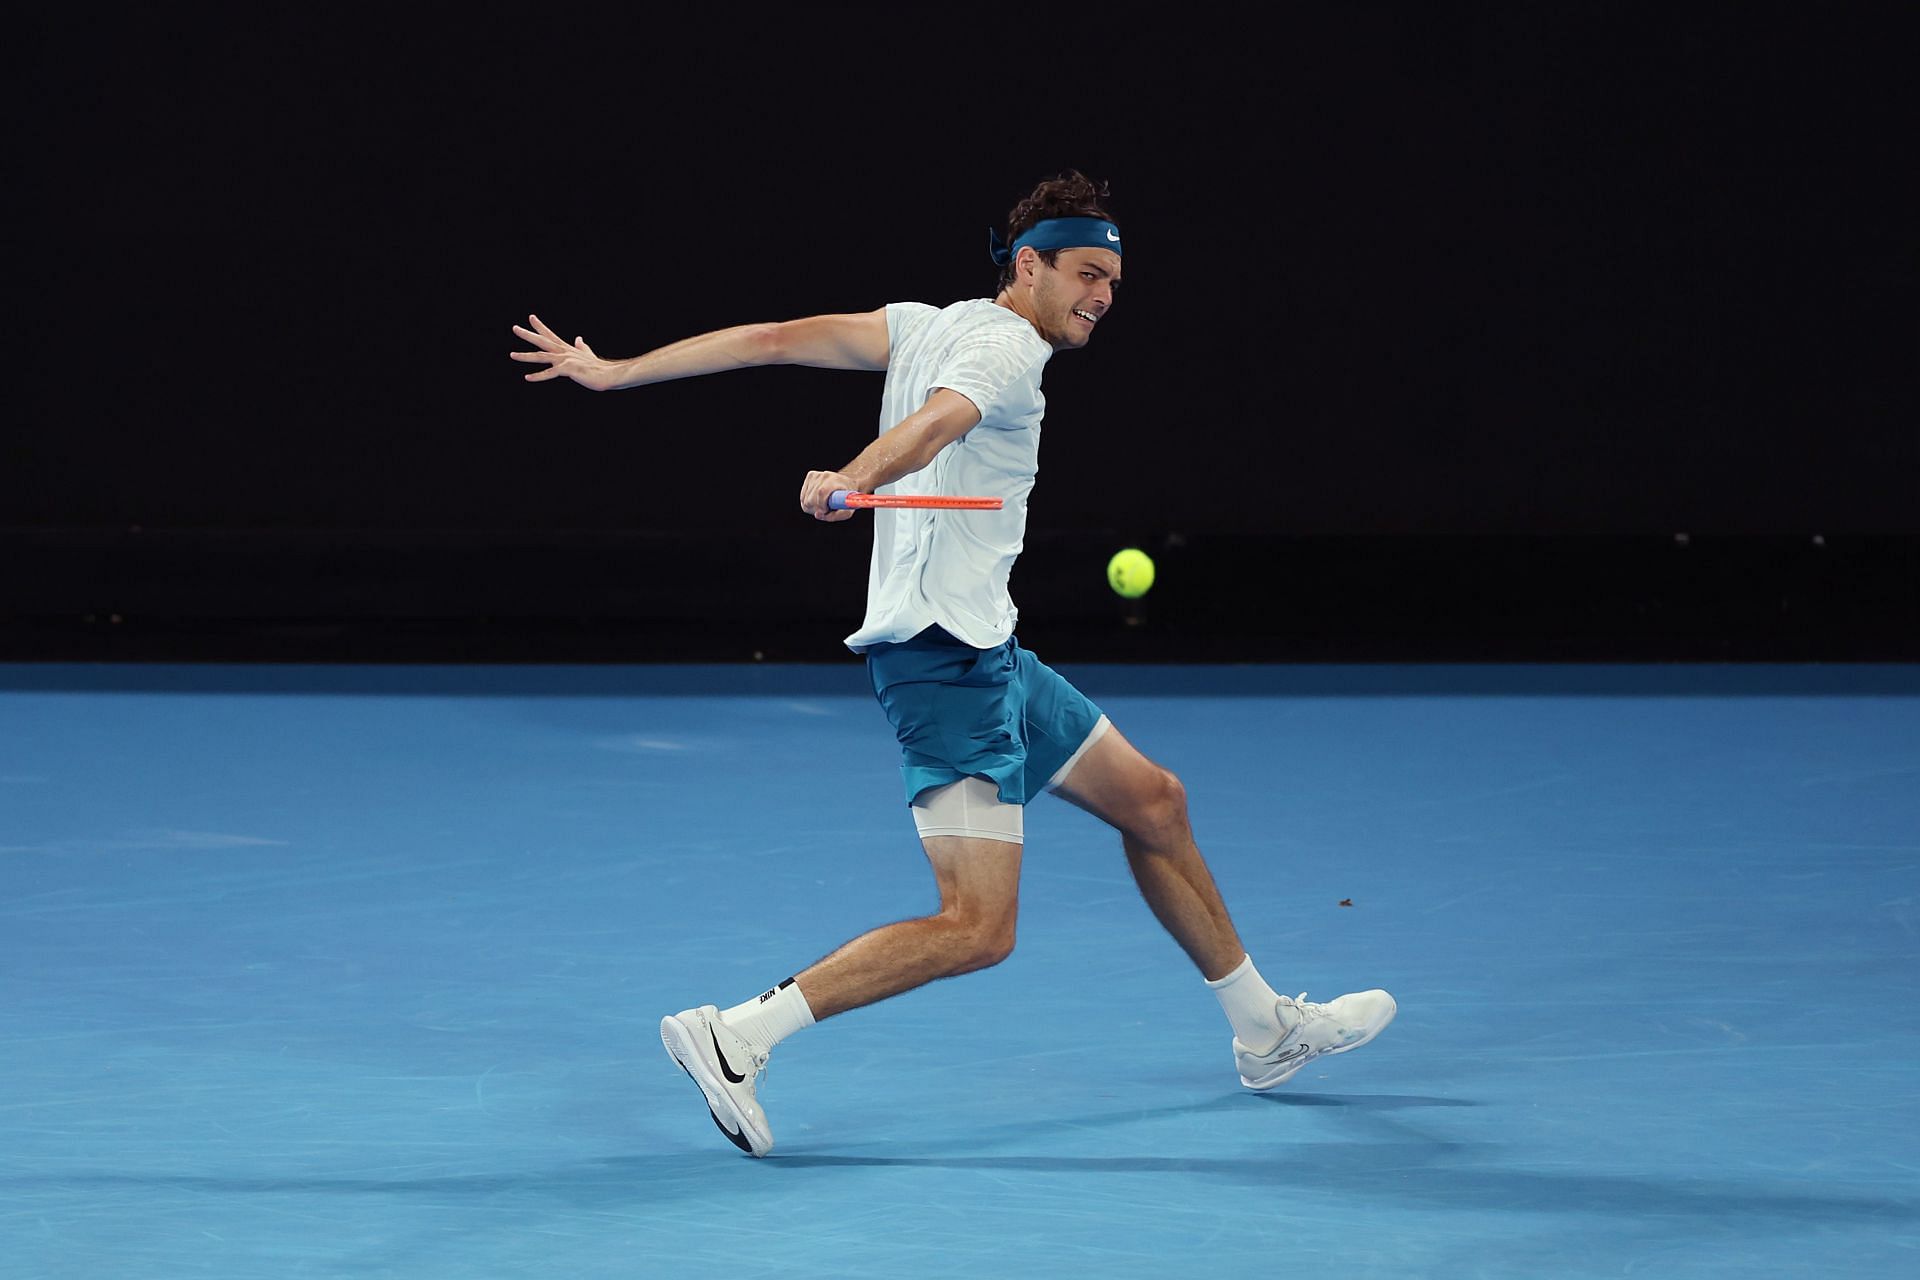 Taylor Fritz at the 2023 Australian Open - Day 2